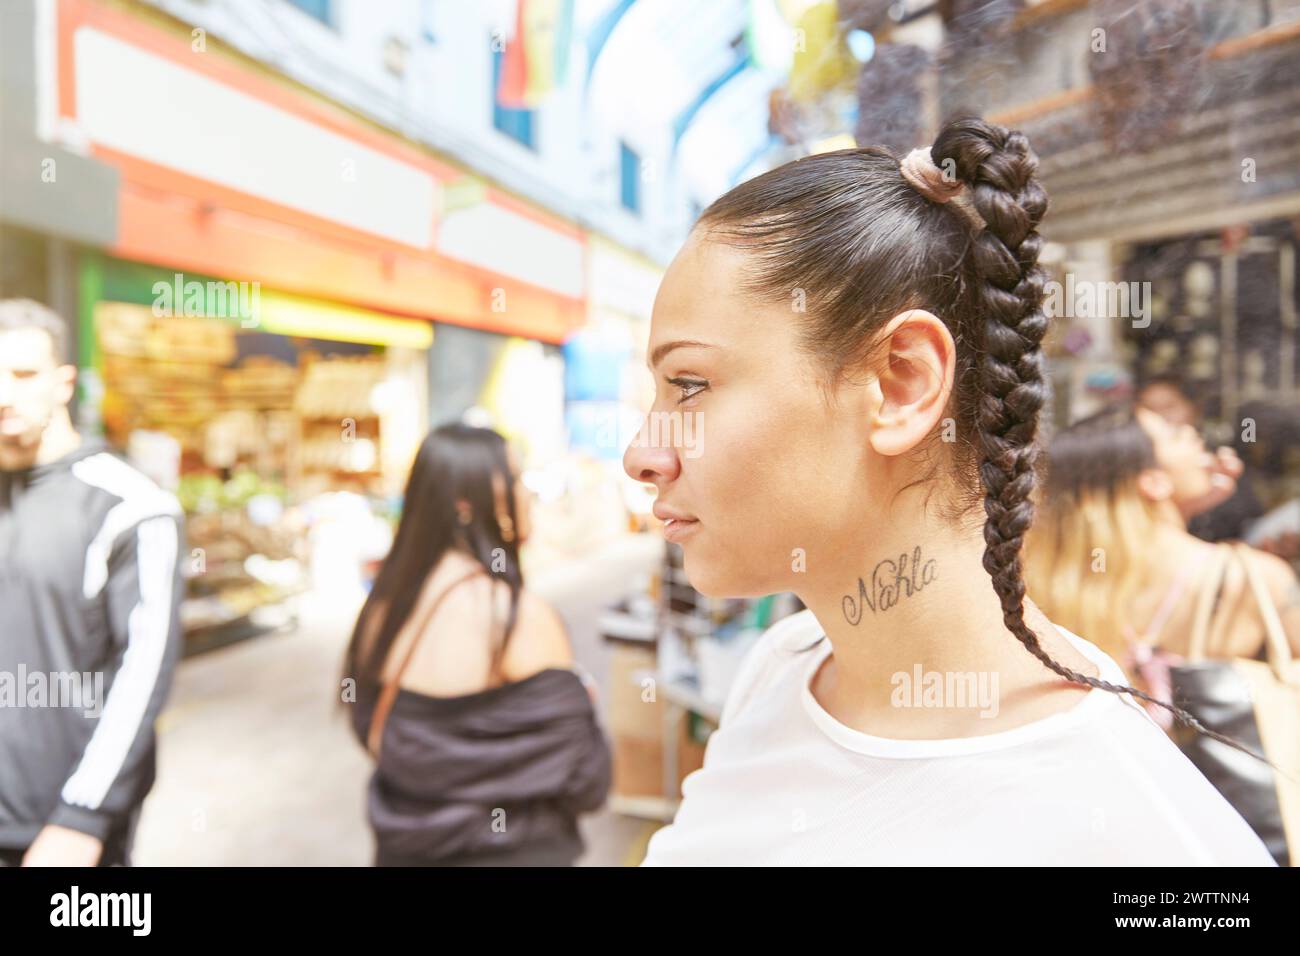 Woman with braided hair on a bustling street Stock Photo